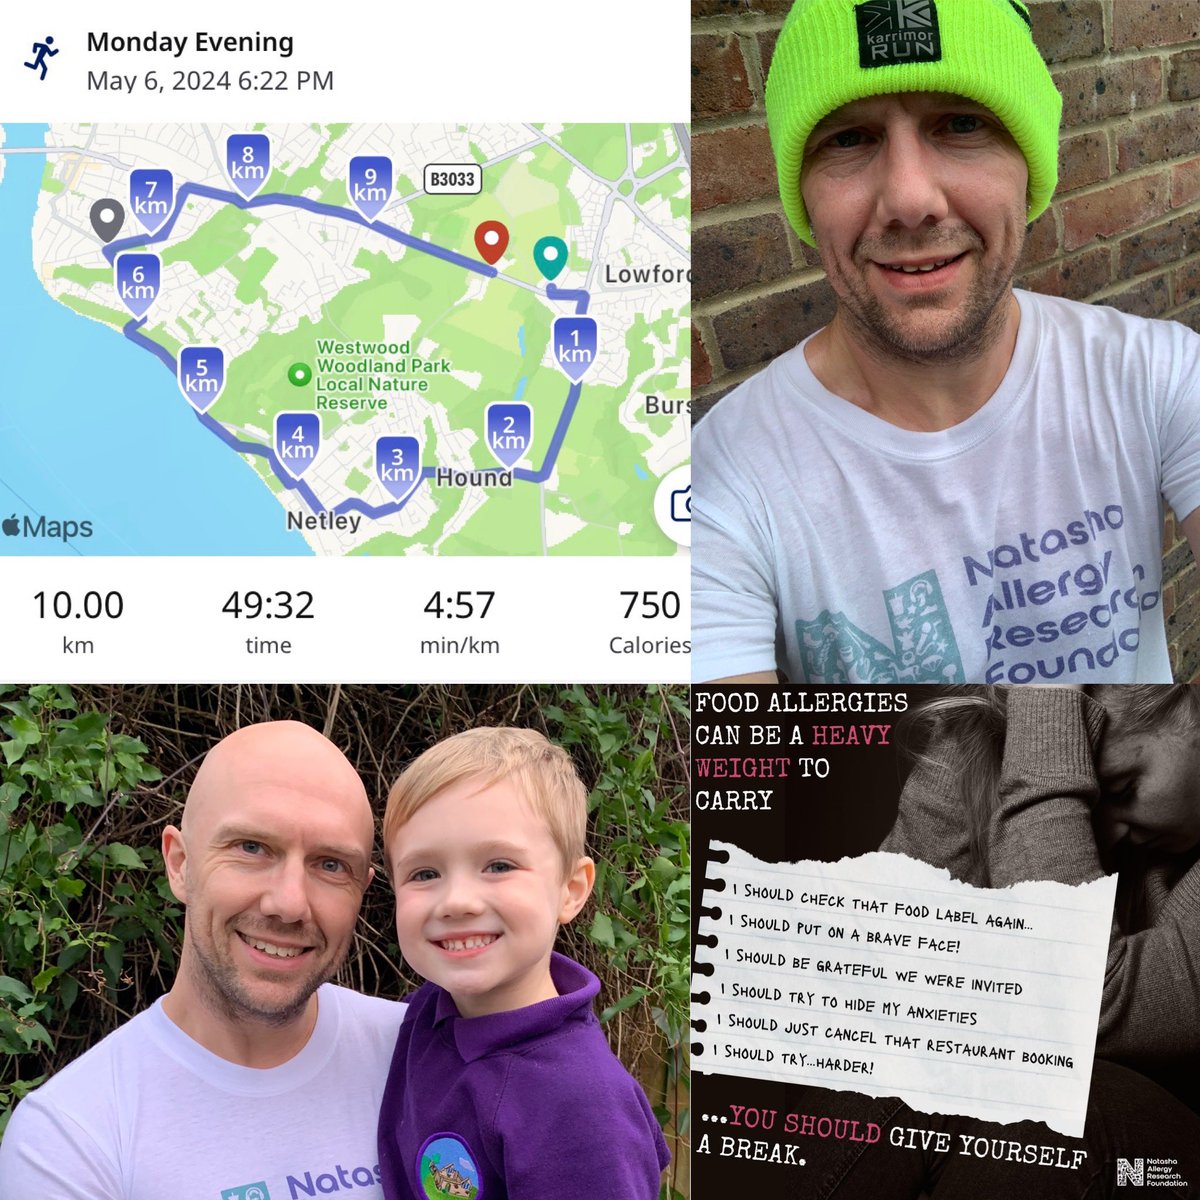 Very tough one today, didn’t fancy that but got through the 10k (49:32) taking total distance covered to 136.5k of 500k target (136,500 metres - 363,500 to go!) for @NatashasLegacy.
#foodallergies #foodallergyawareness #anaphylaxisawareness #fundraising